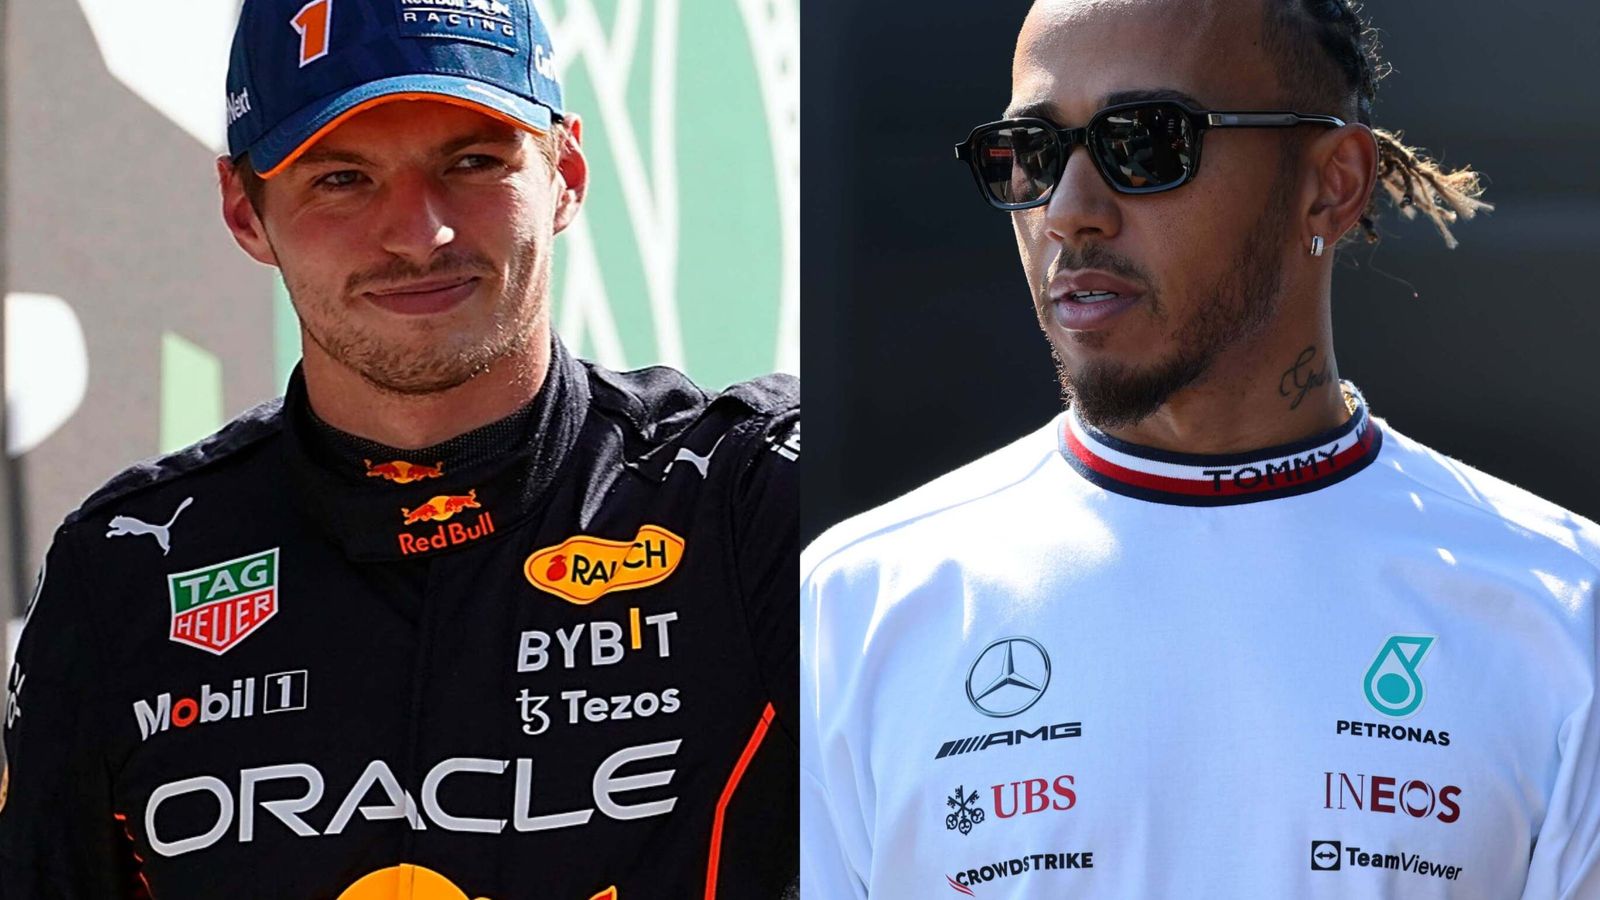 Lewis Hamilton desperate to fight Max Verstappen as he remains confident of Mercedes win